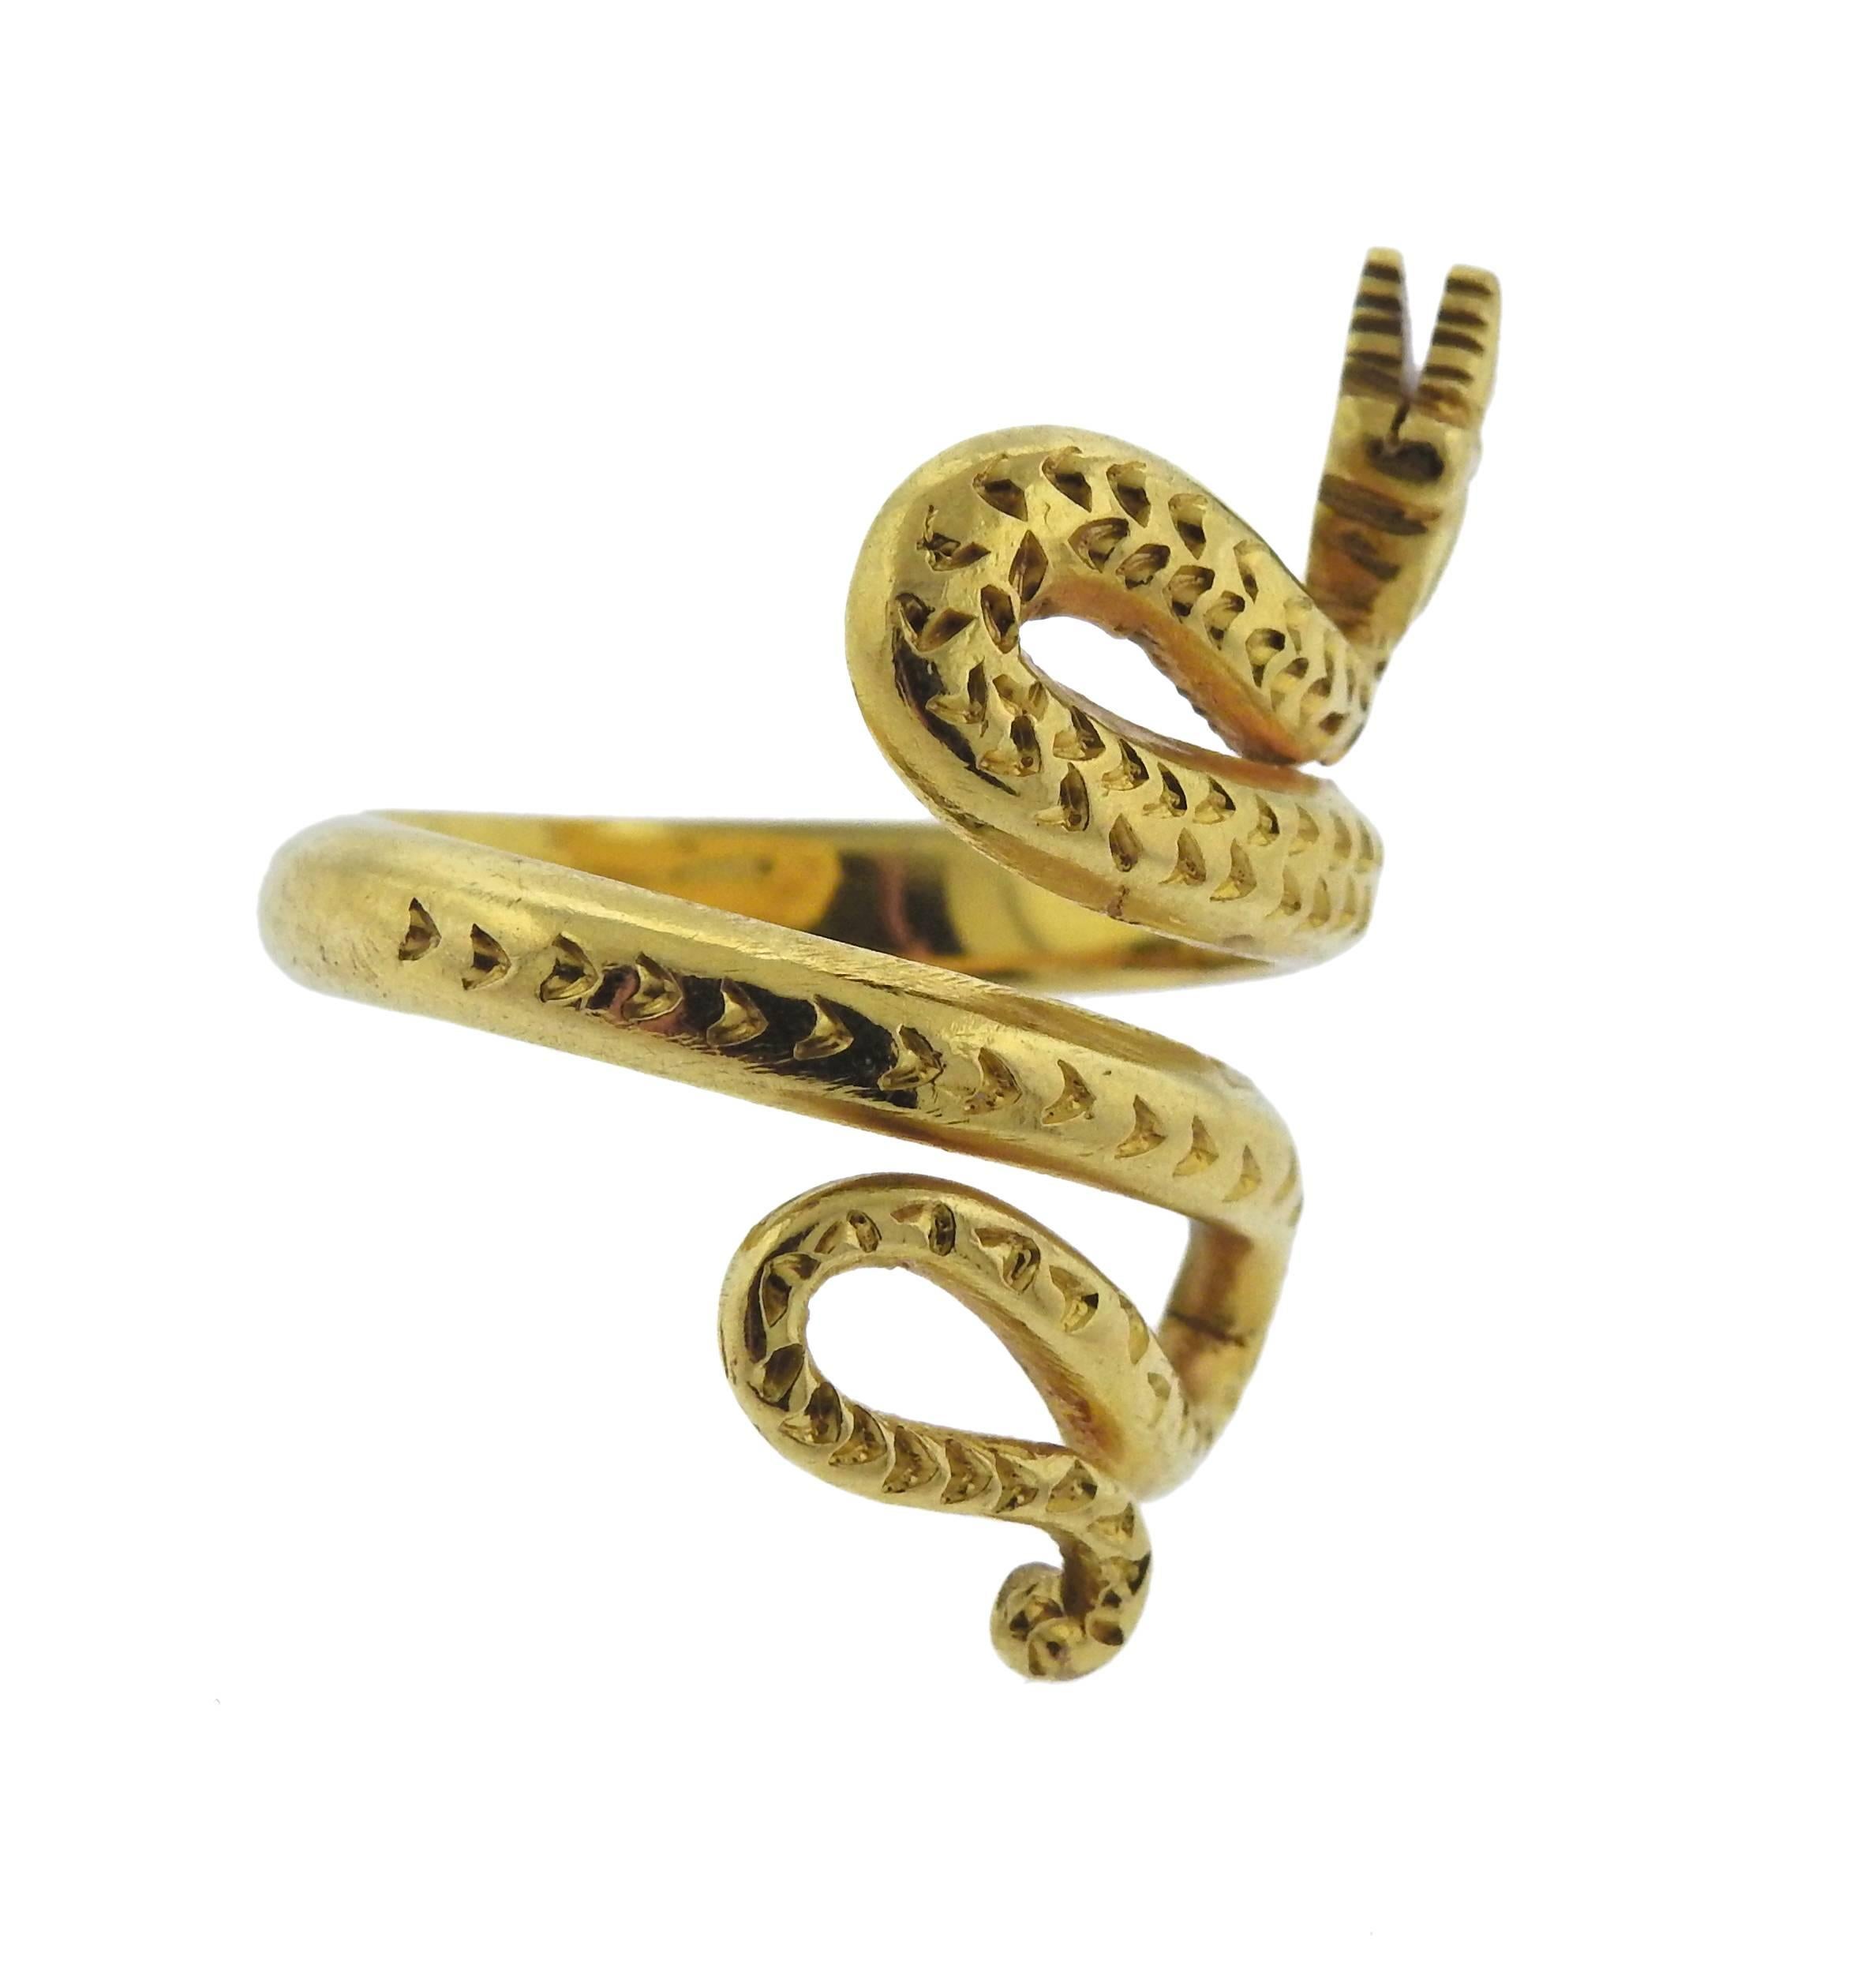 22k yellow gold snake ring, crafted by Greek designer Zolotas. Ring size - 6.5, ring top - 30mm wide, weighs 9.8 grams.